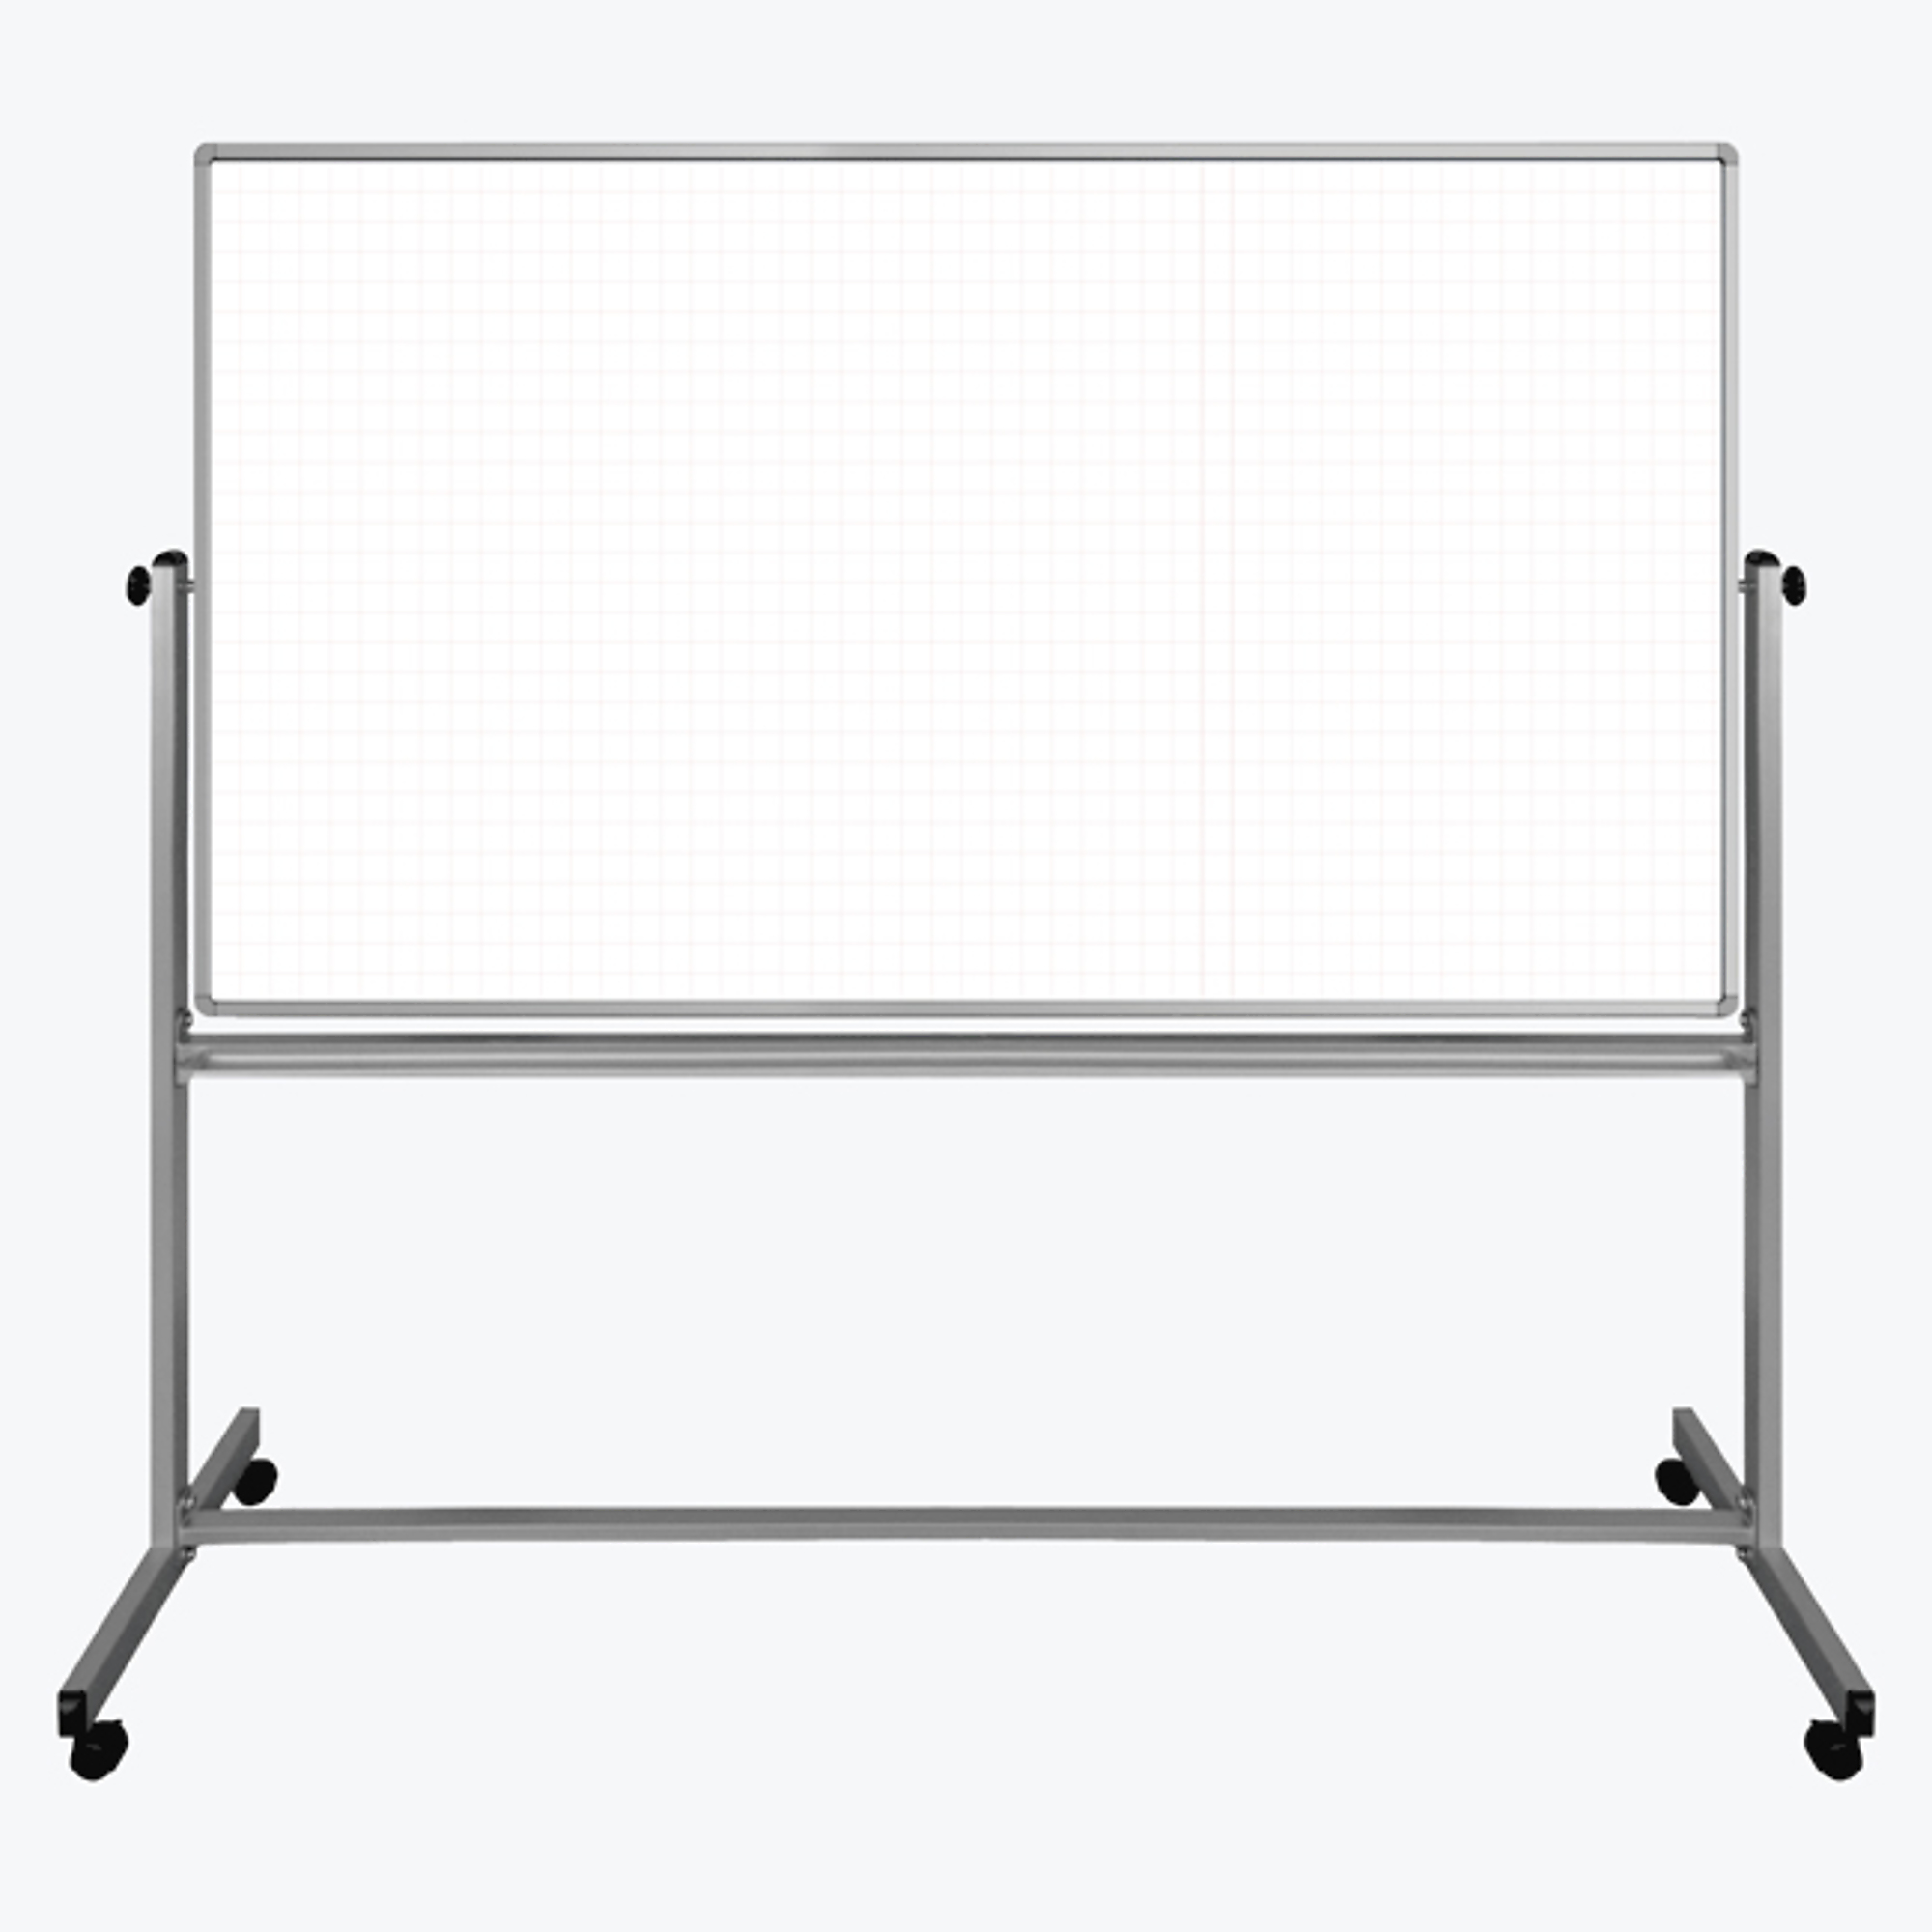 Mobile Magnetic Dry Erase Ghost Grid Board, Color Finish White, Pieces (qty.) 1, Material Steel, Model - Luxor MB7240LB